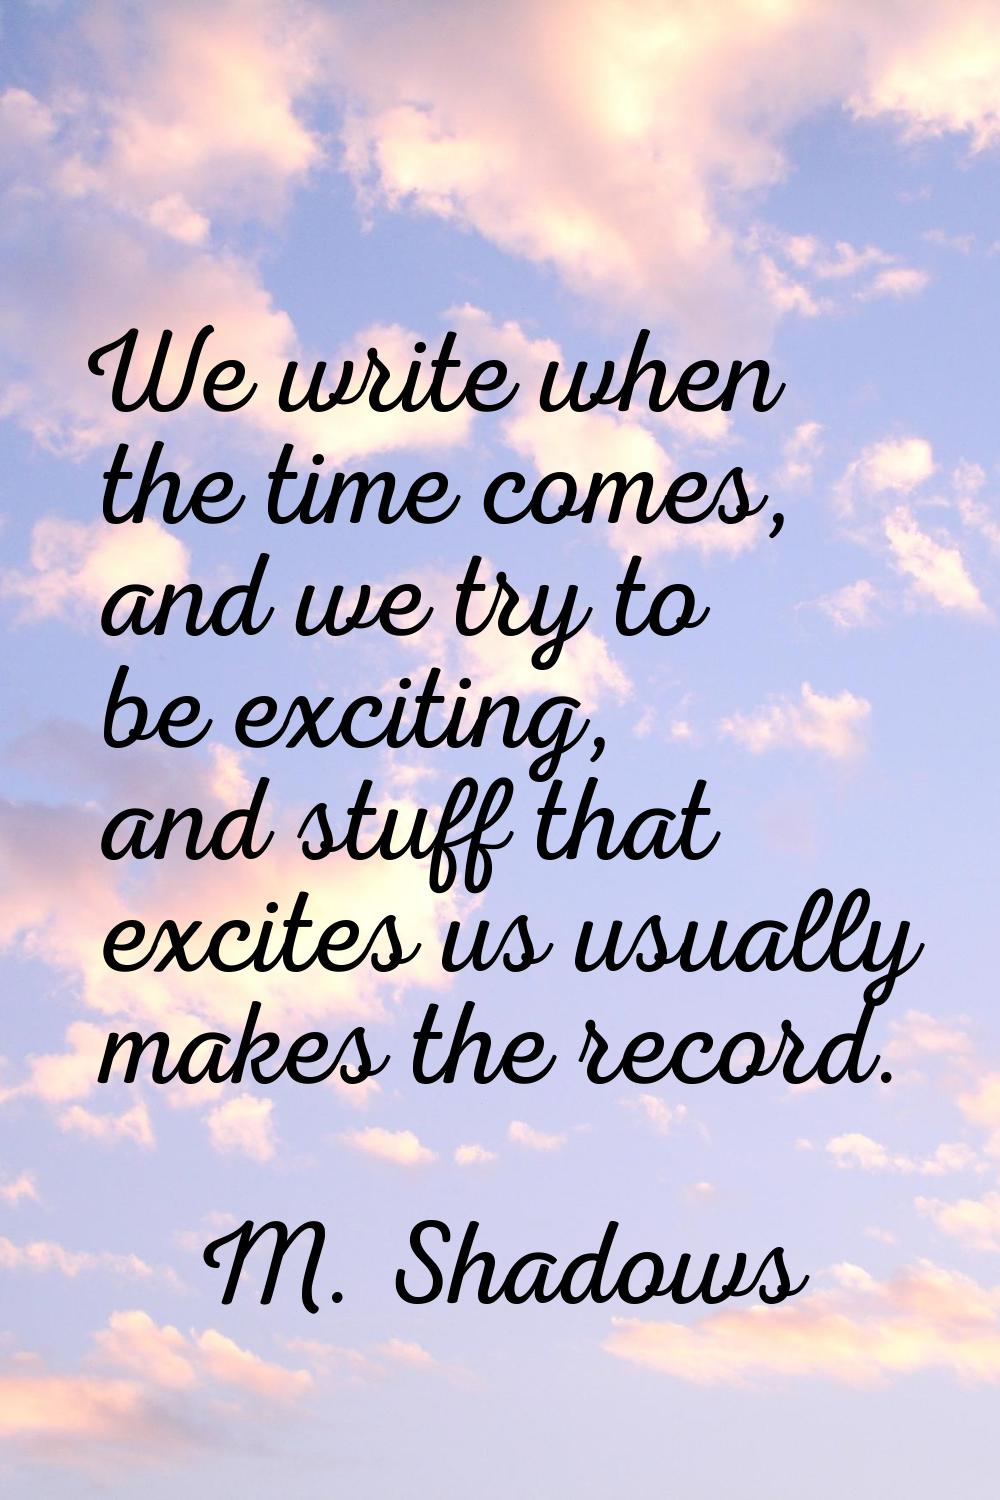 We write when the time comes, and we try to be exciting, and stuff that excites us usually makes th